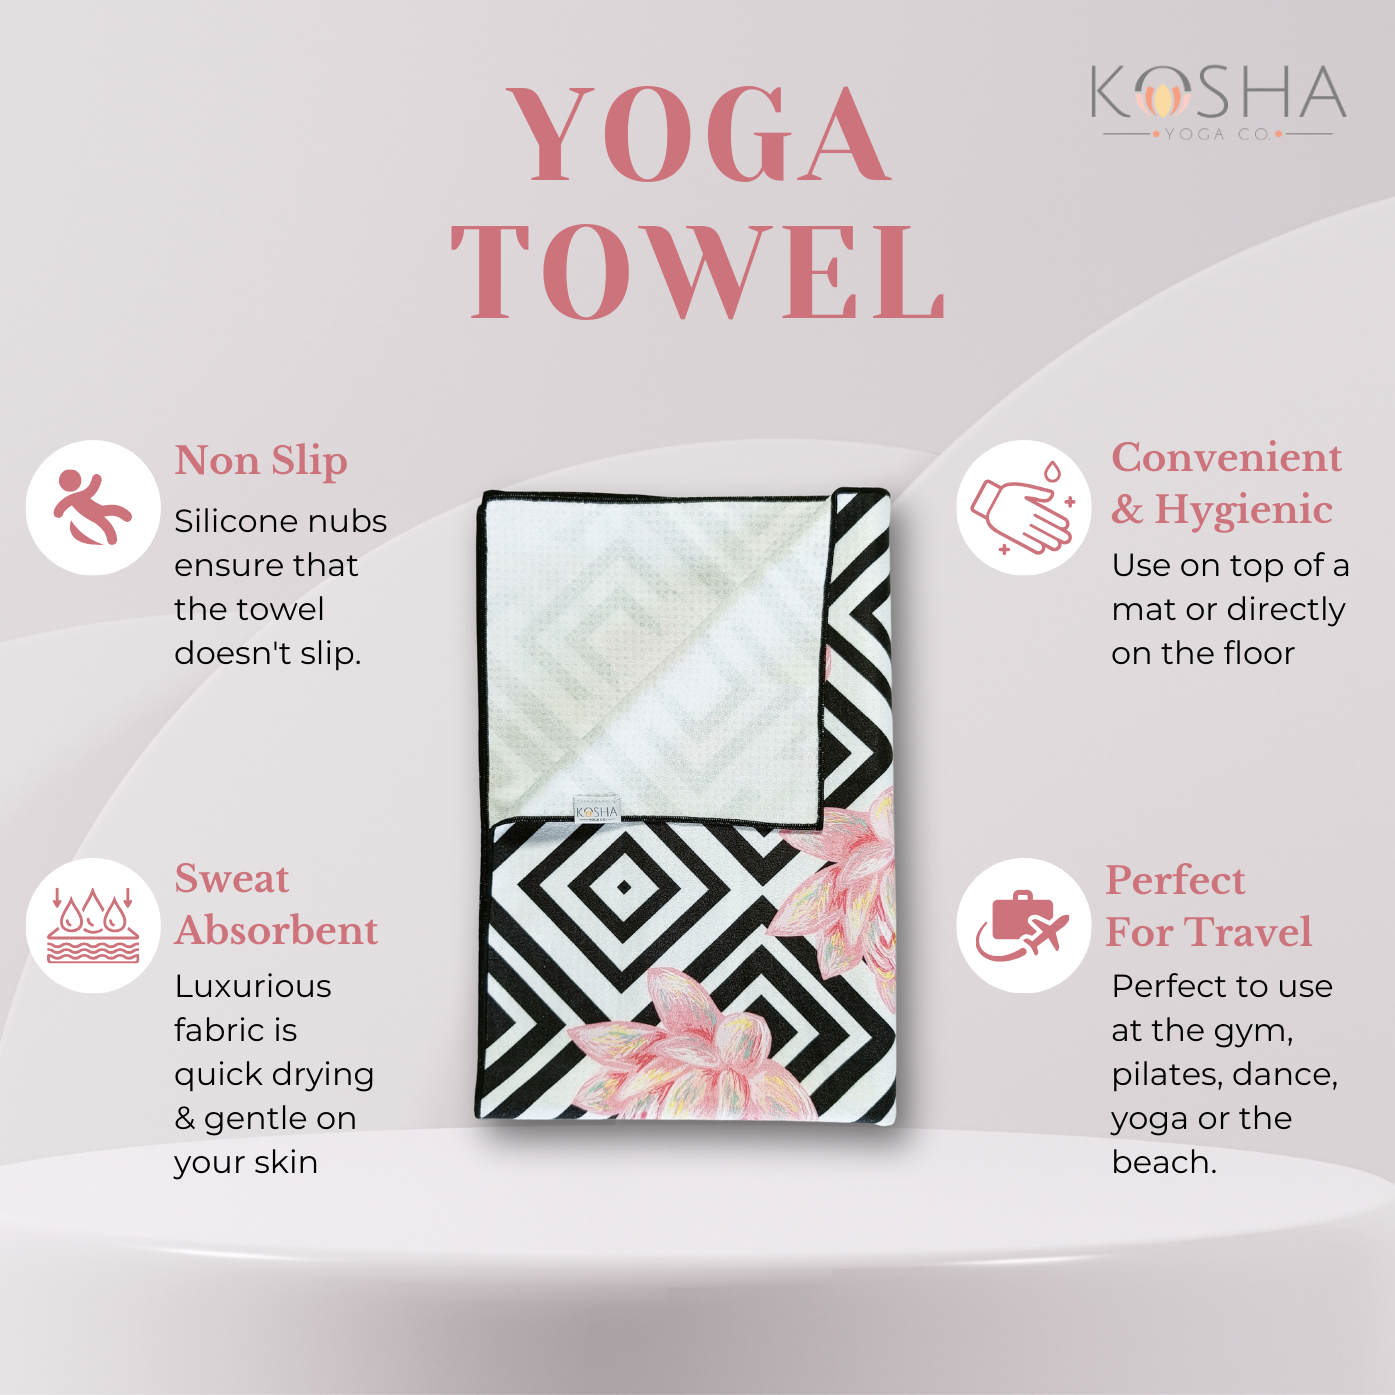 how to do yoga while travelling